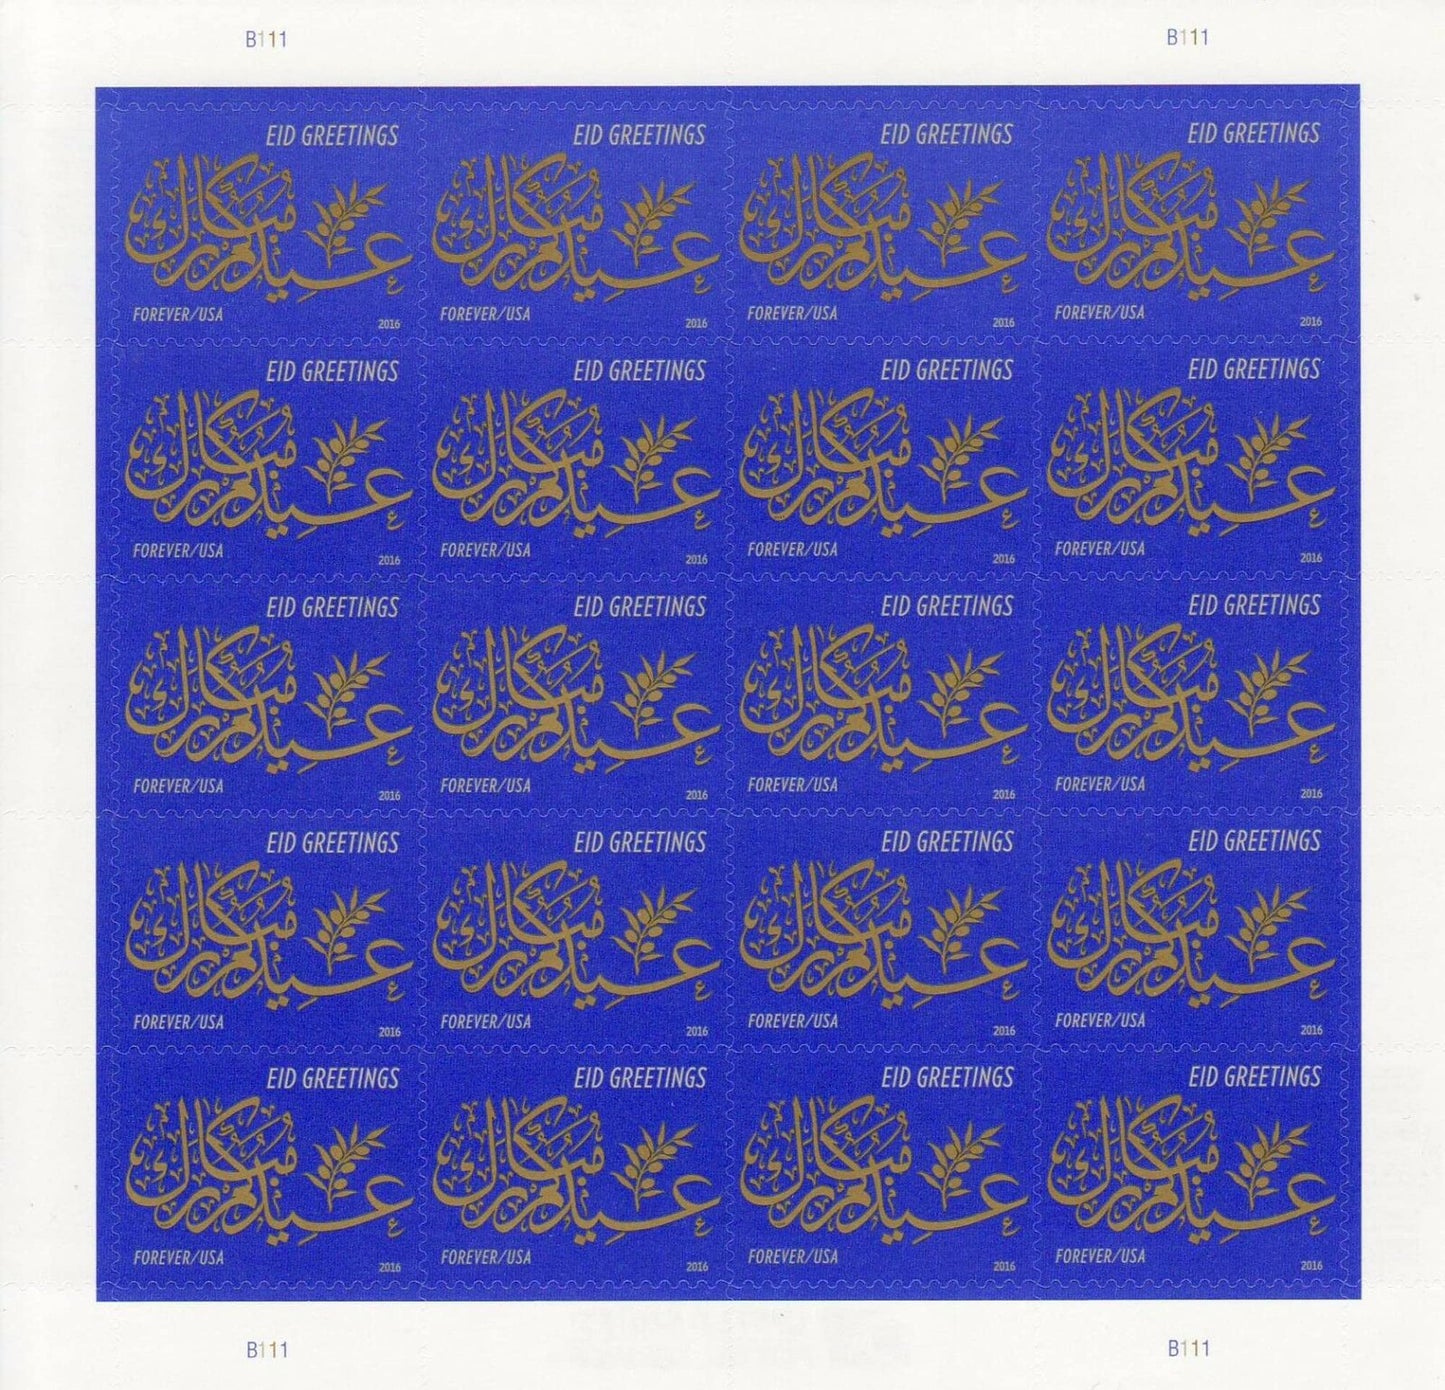 2022 US EID Greetings First Class Postage Stamps